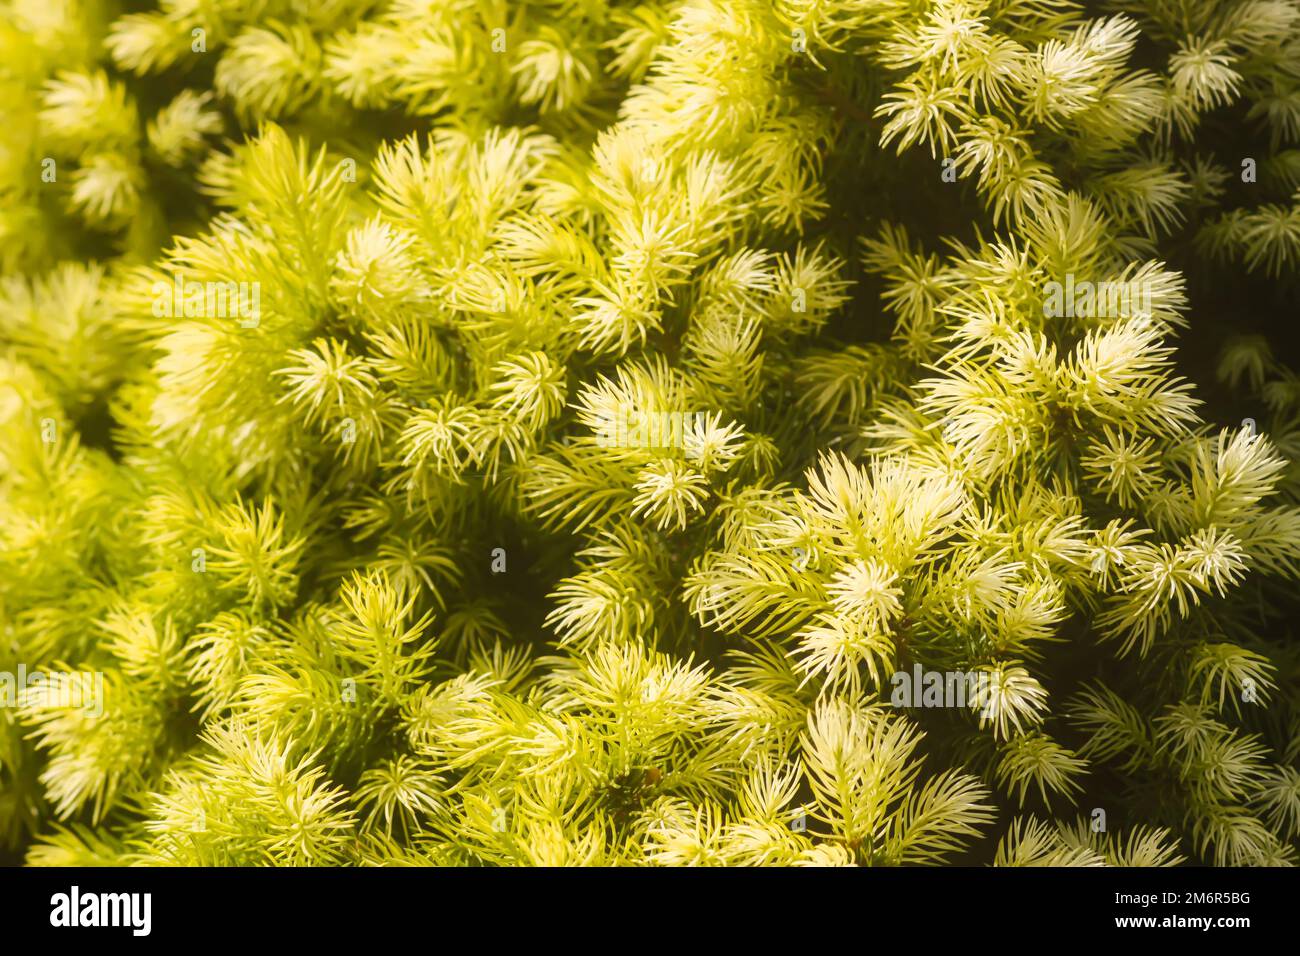 Spruce trees in a summer park. Evergreen trees close up in sunlight. Stock Photo